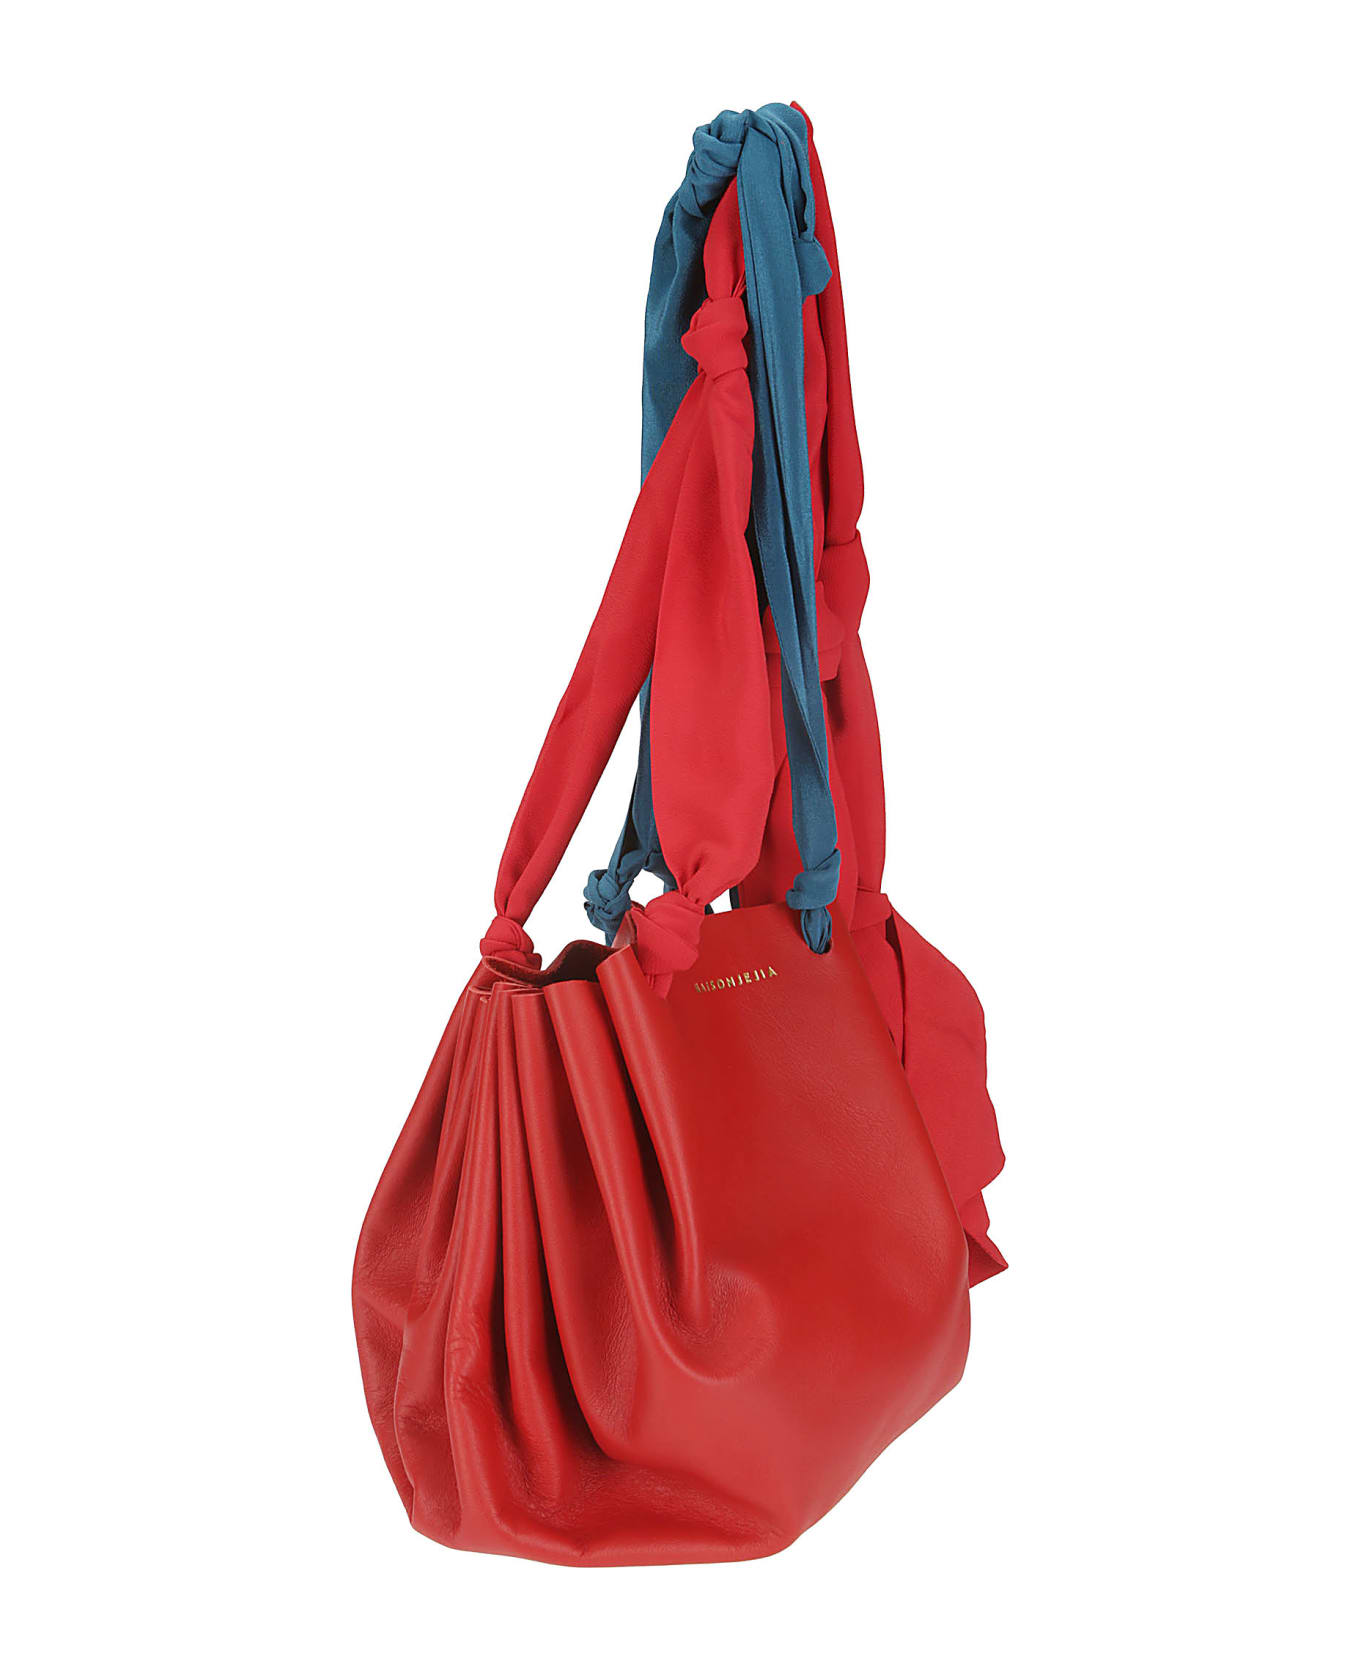 Jejia Bloom Baby Bag - RED LEATHER A1COTTON SILK